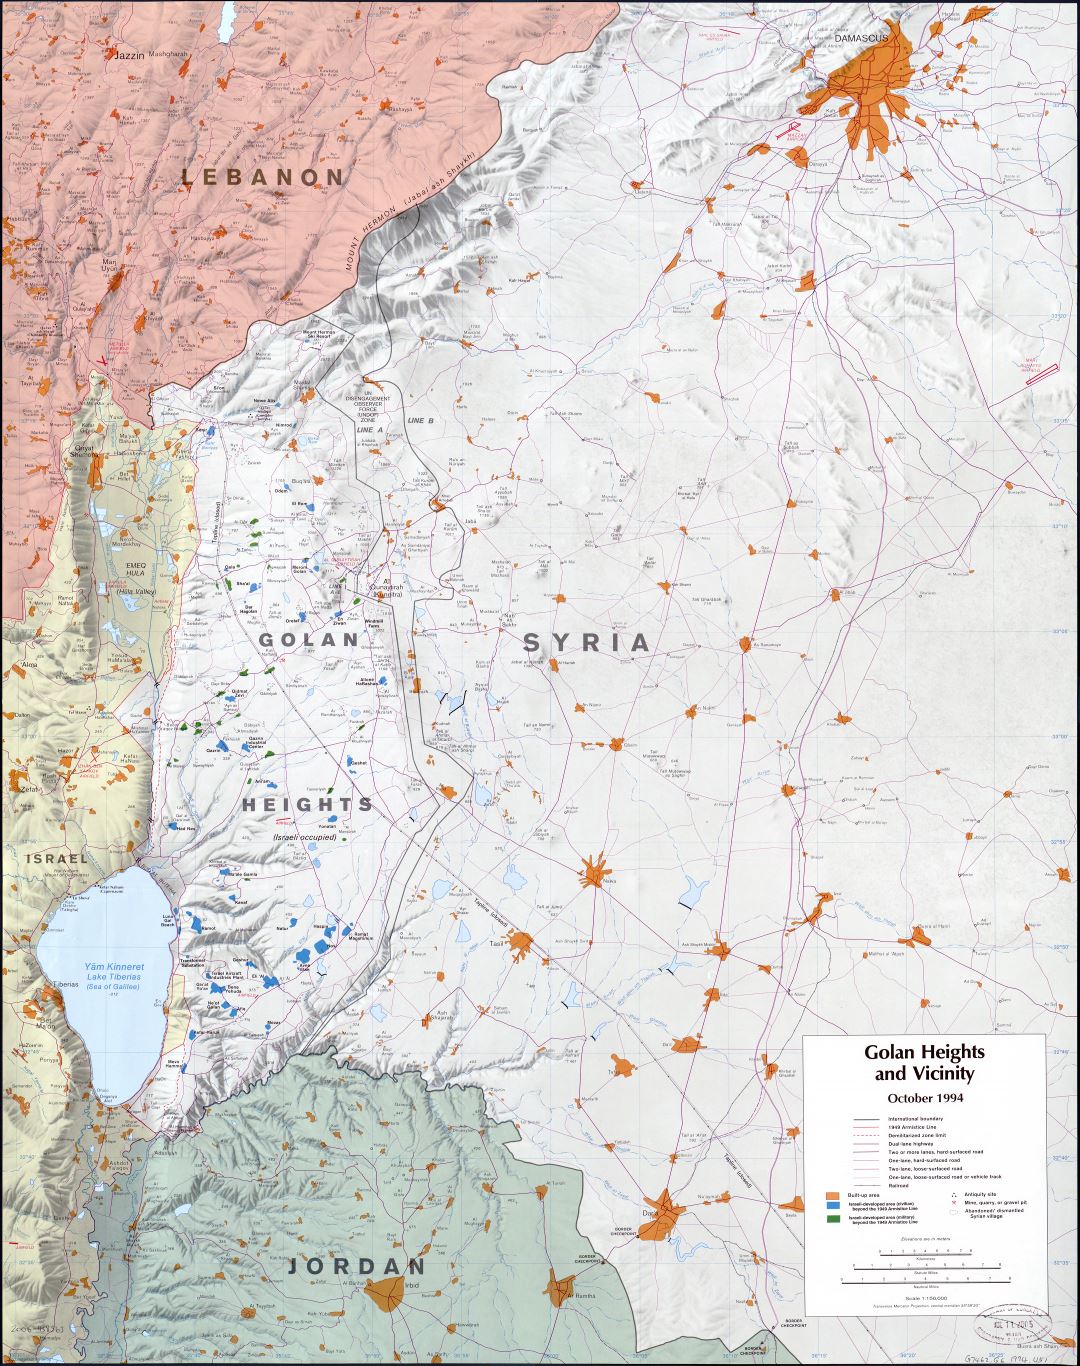 Large scale map of the Golan Heights and vicinity with relief and other marks - 1994